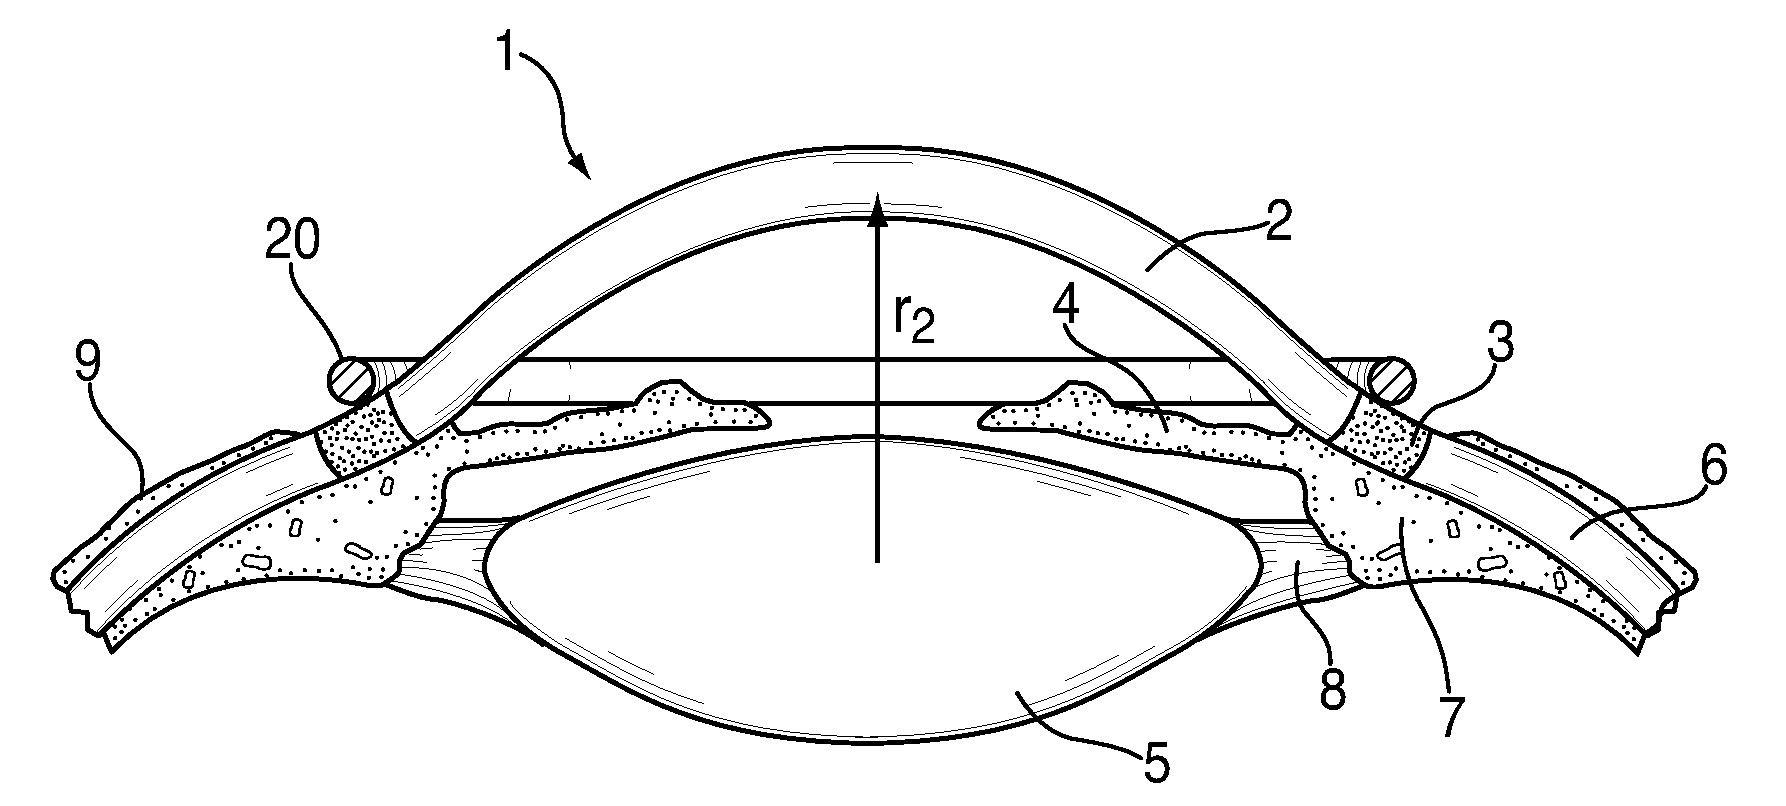 System and device for correcting hyperopia, myopia and presbyopia